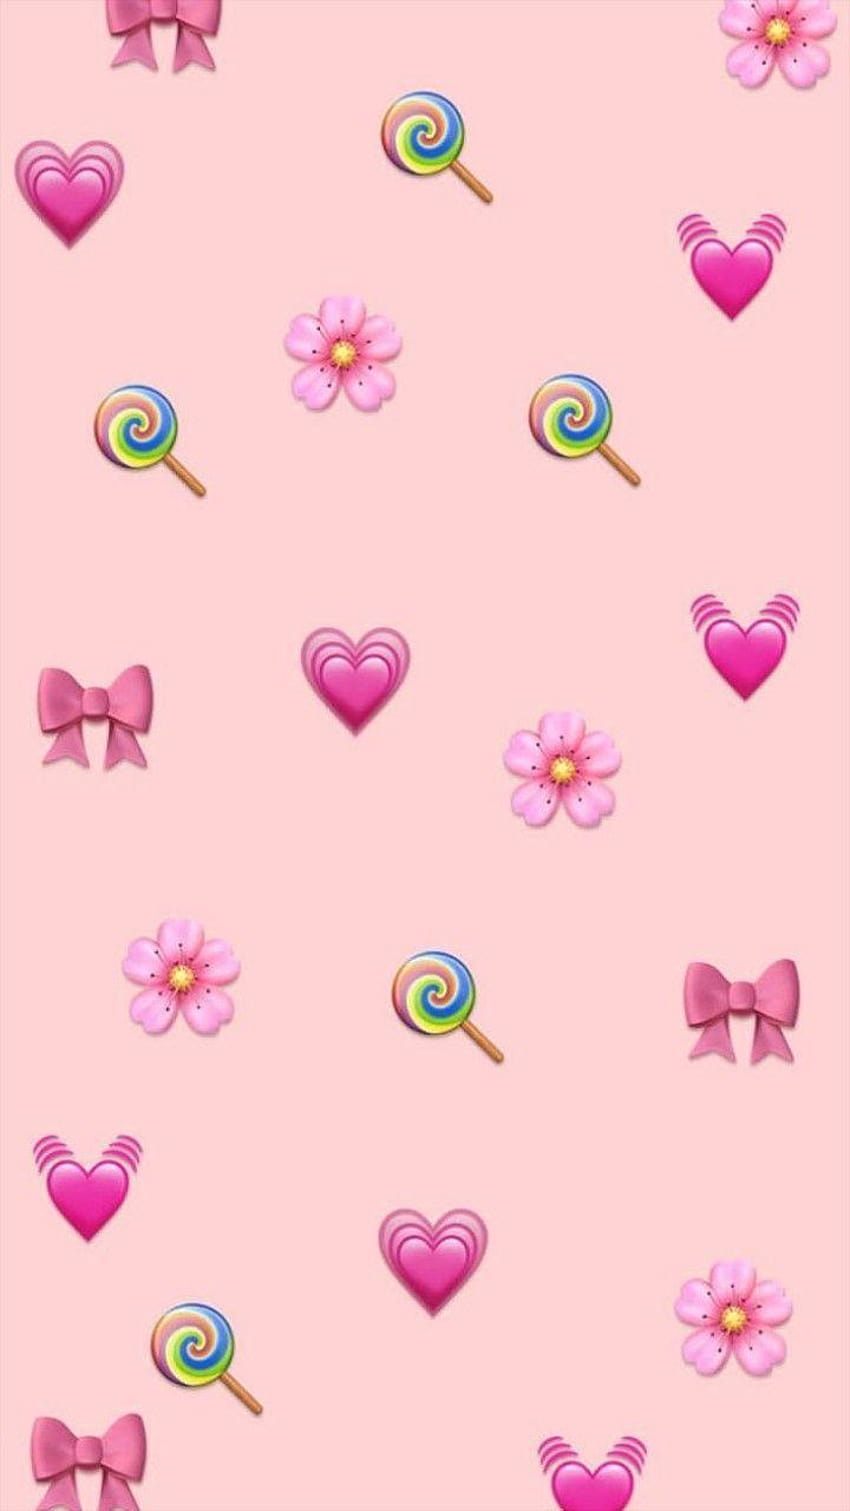 A pink background with hearts, lollipops and candy - Emoji